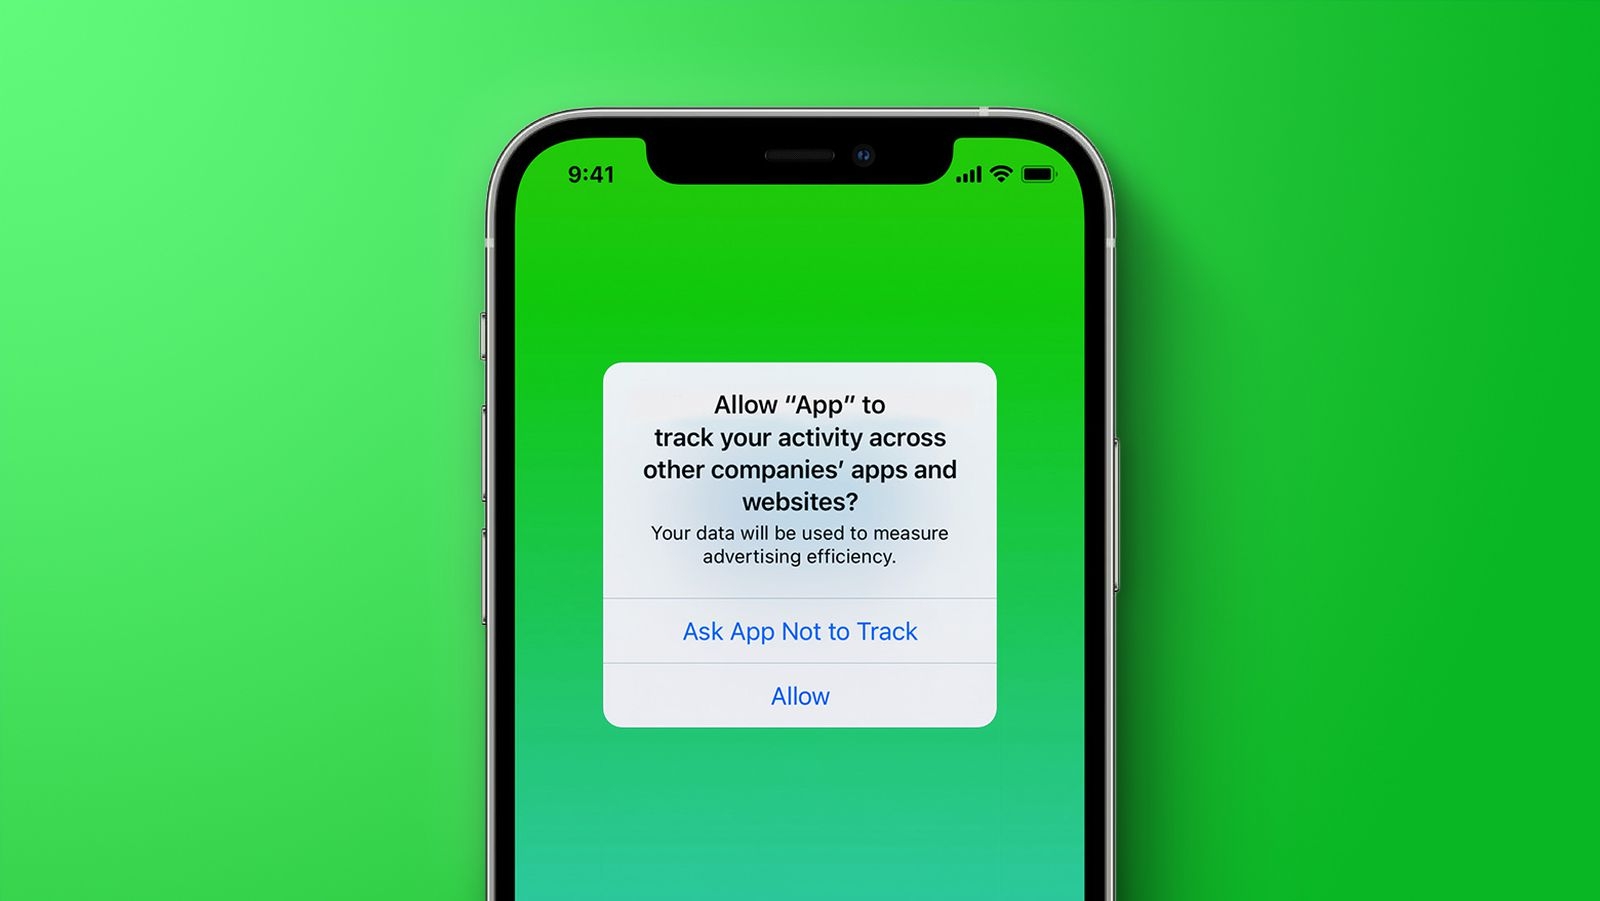 How to Use New Fascinating Features on iOS 14.5?